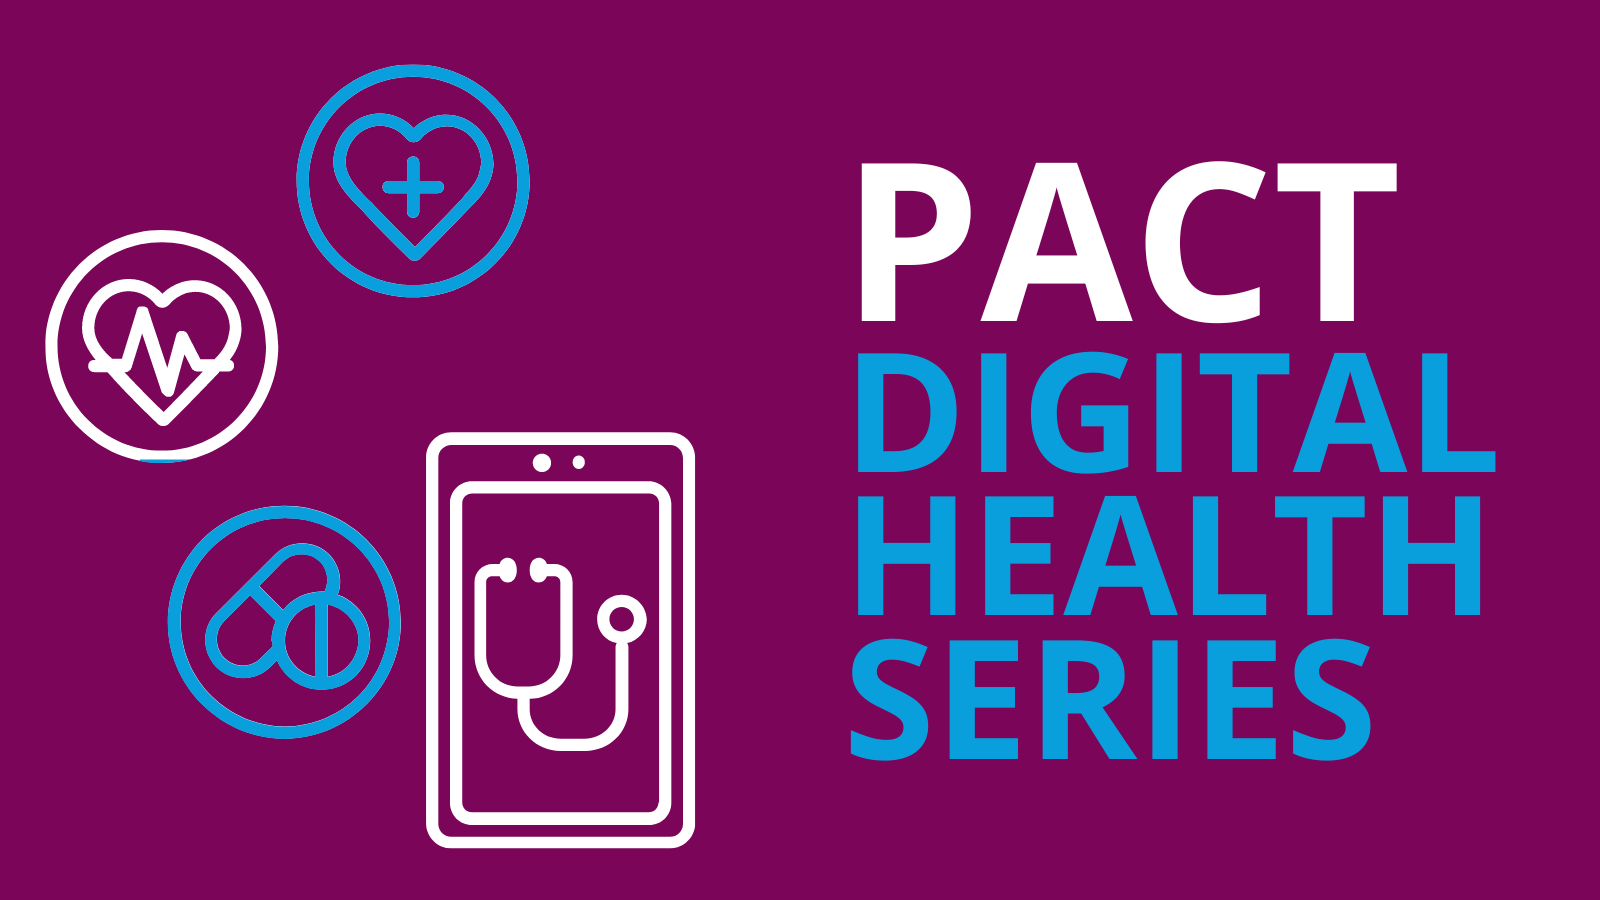 Shares the logo of the PACT Digital Health series